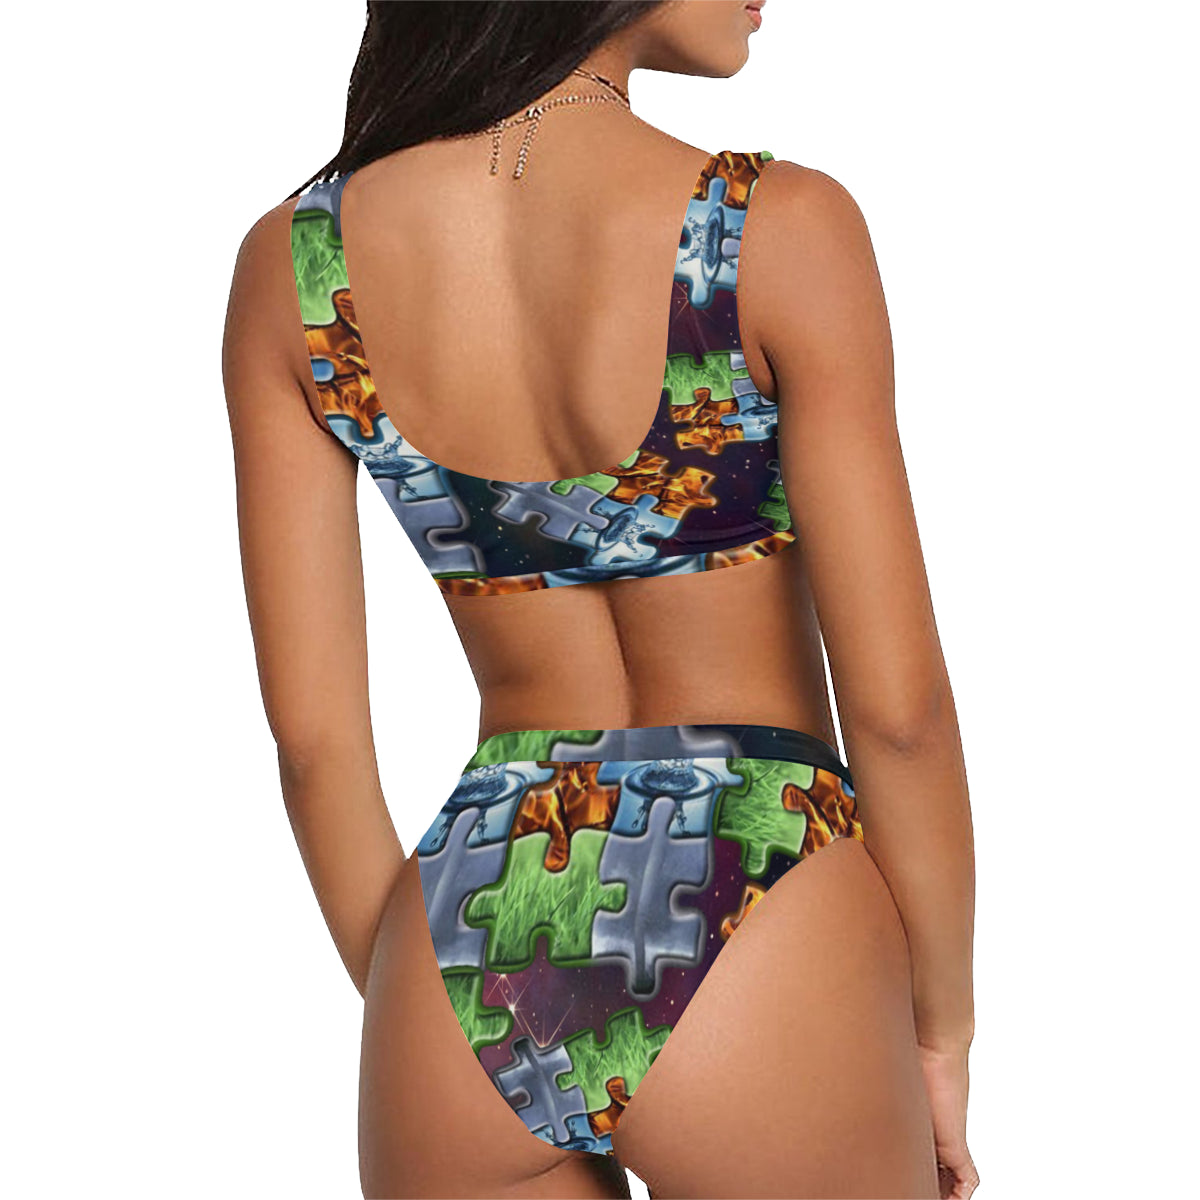 4elements puzzle Sport Top & High-Waisted Bikini swimsuit